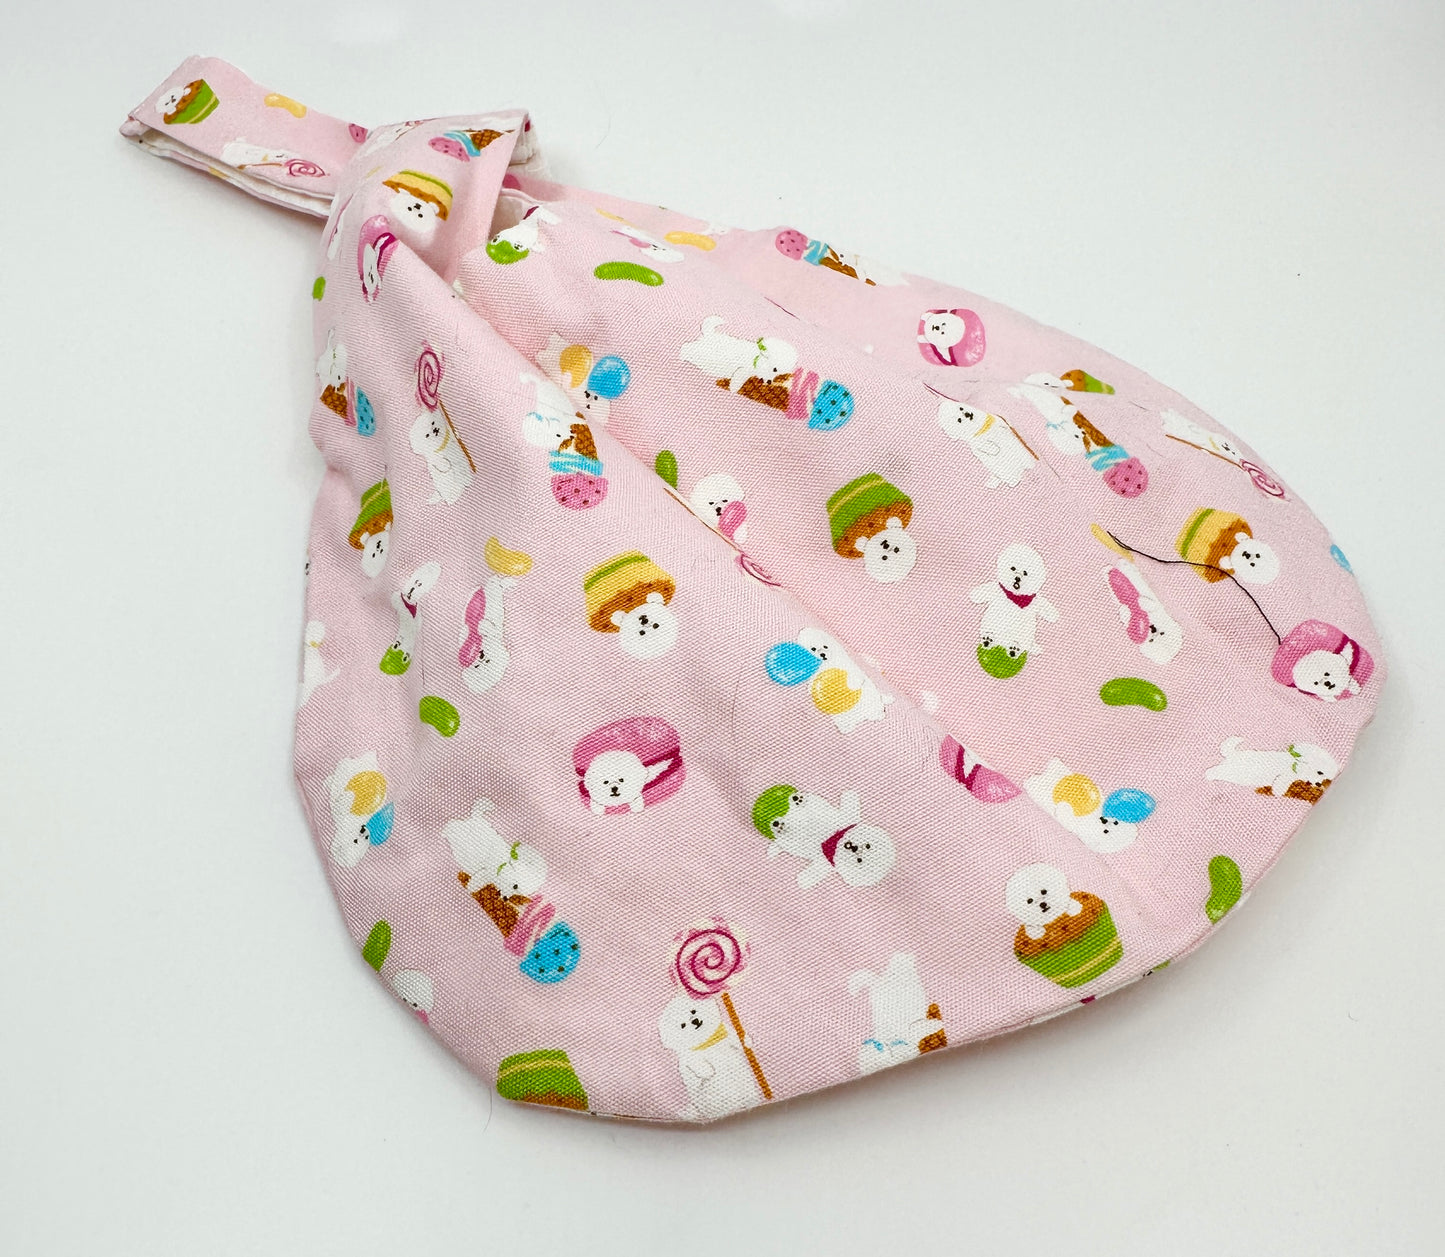 Knot Bag | Bichons and Sweets on Light Pink